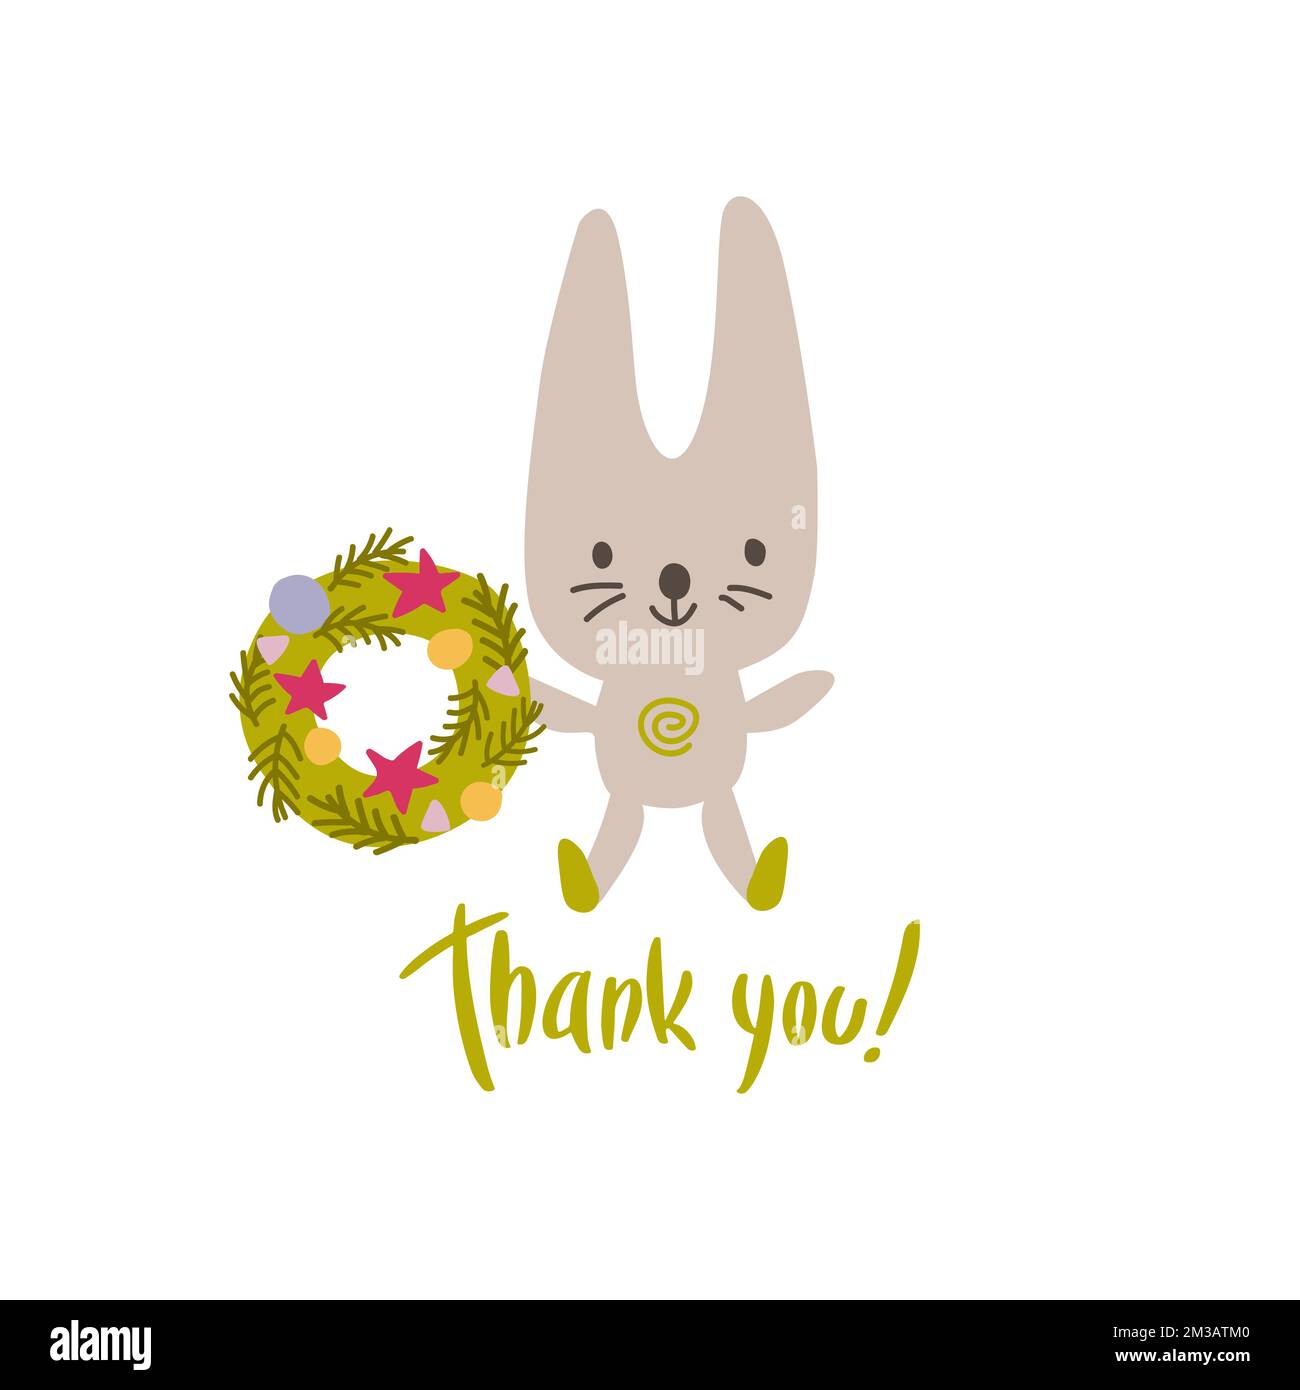 Bunny with hand drawn lettering Thank you. Doodle kawaii style illustration. Stock Vector